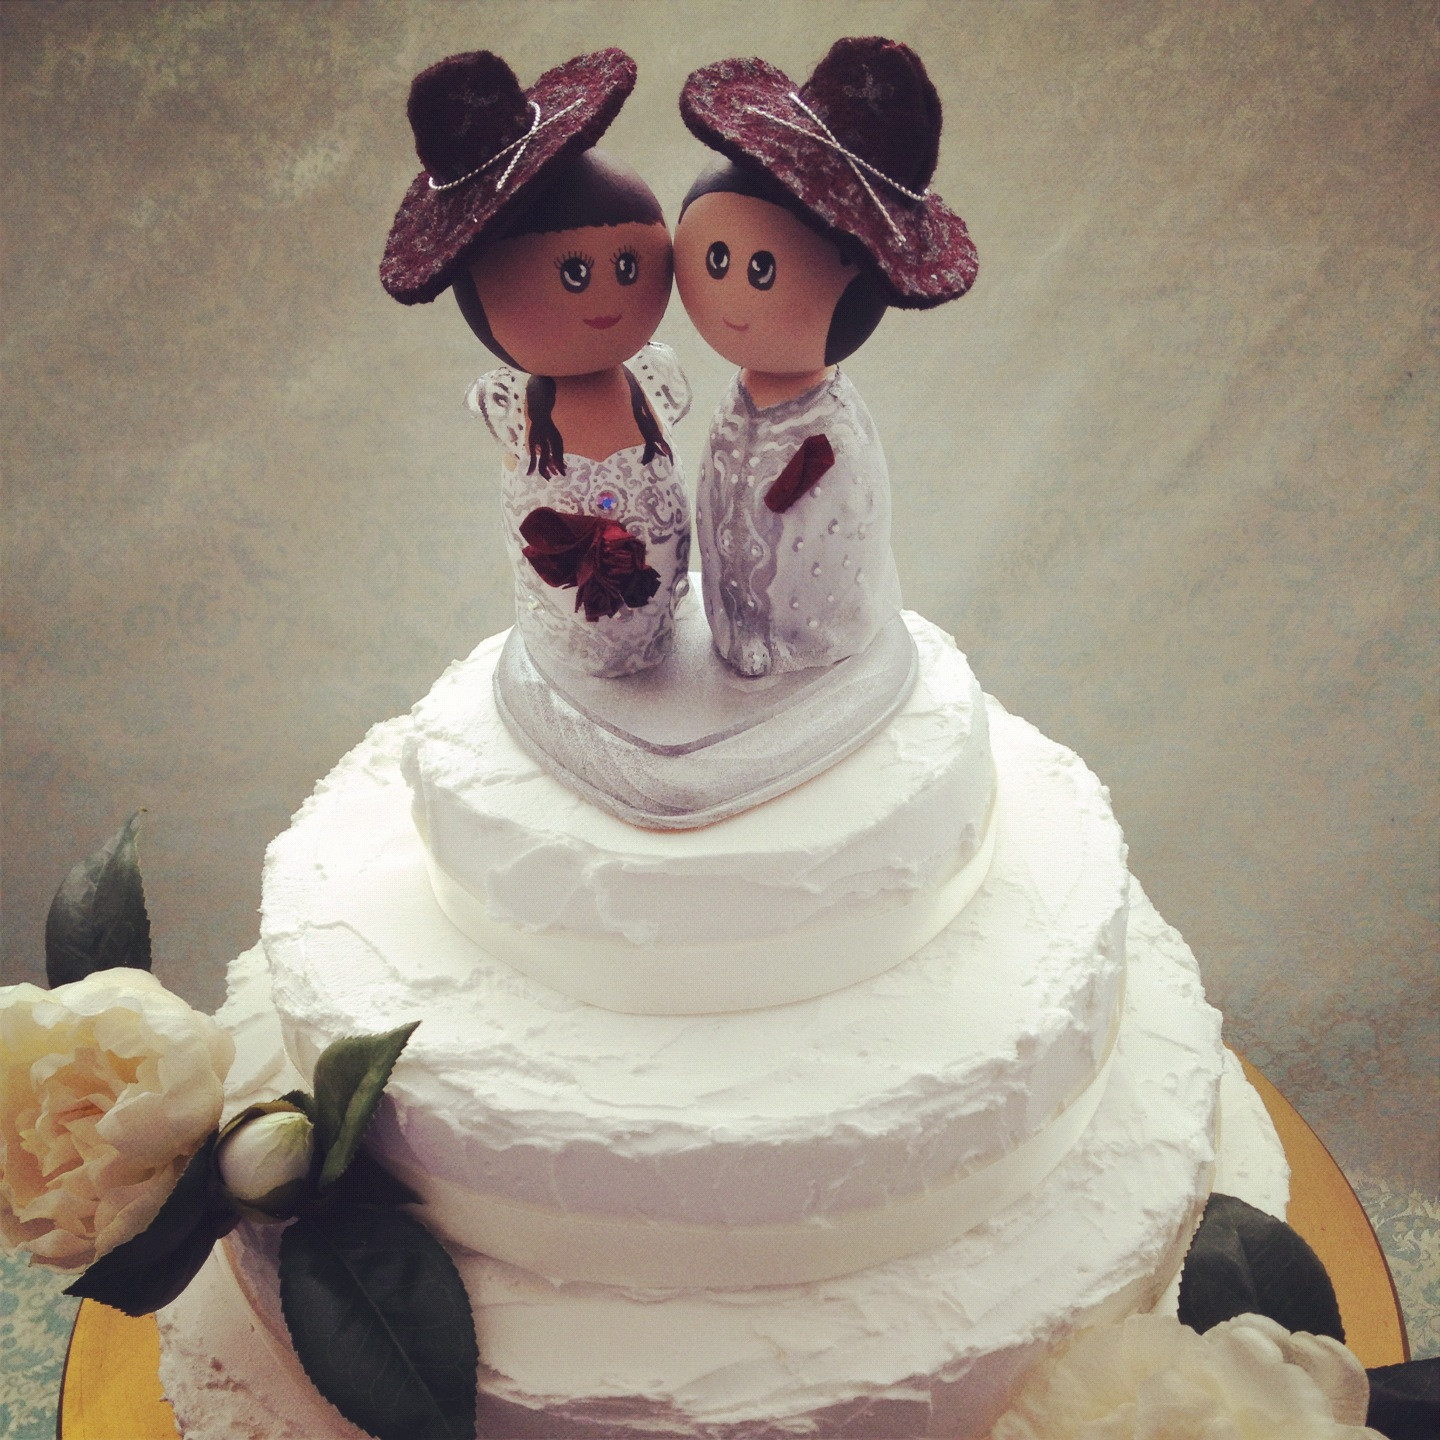 Mexican Wedding Cake Toppers
 DSMeeBee Indian Bride and Mexican Groom Wedding Cake Toppers